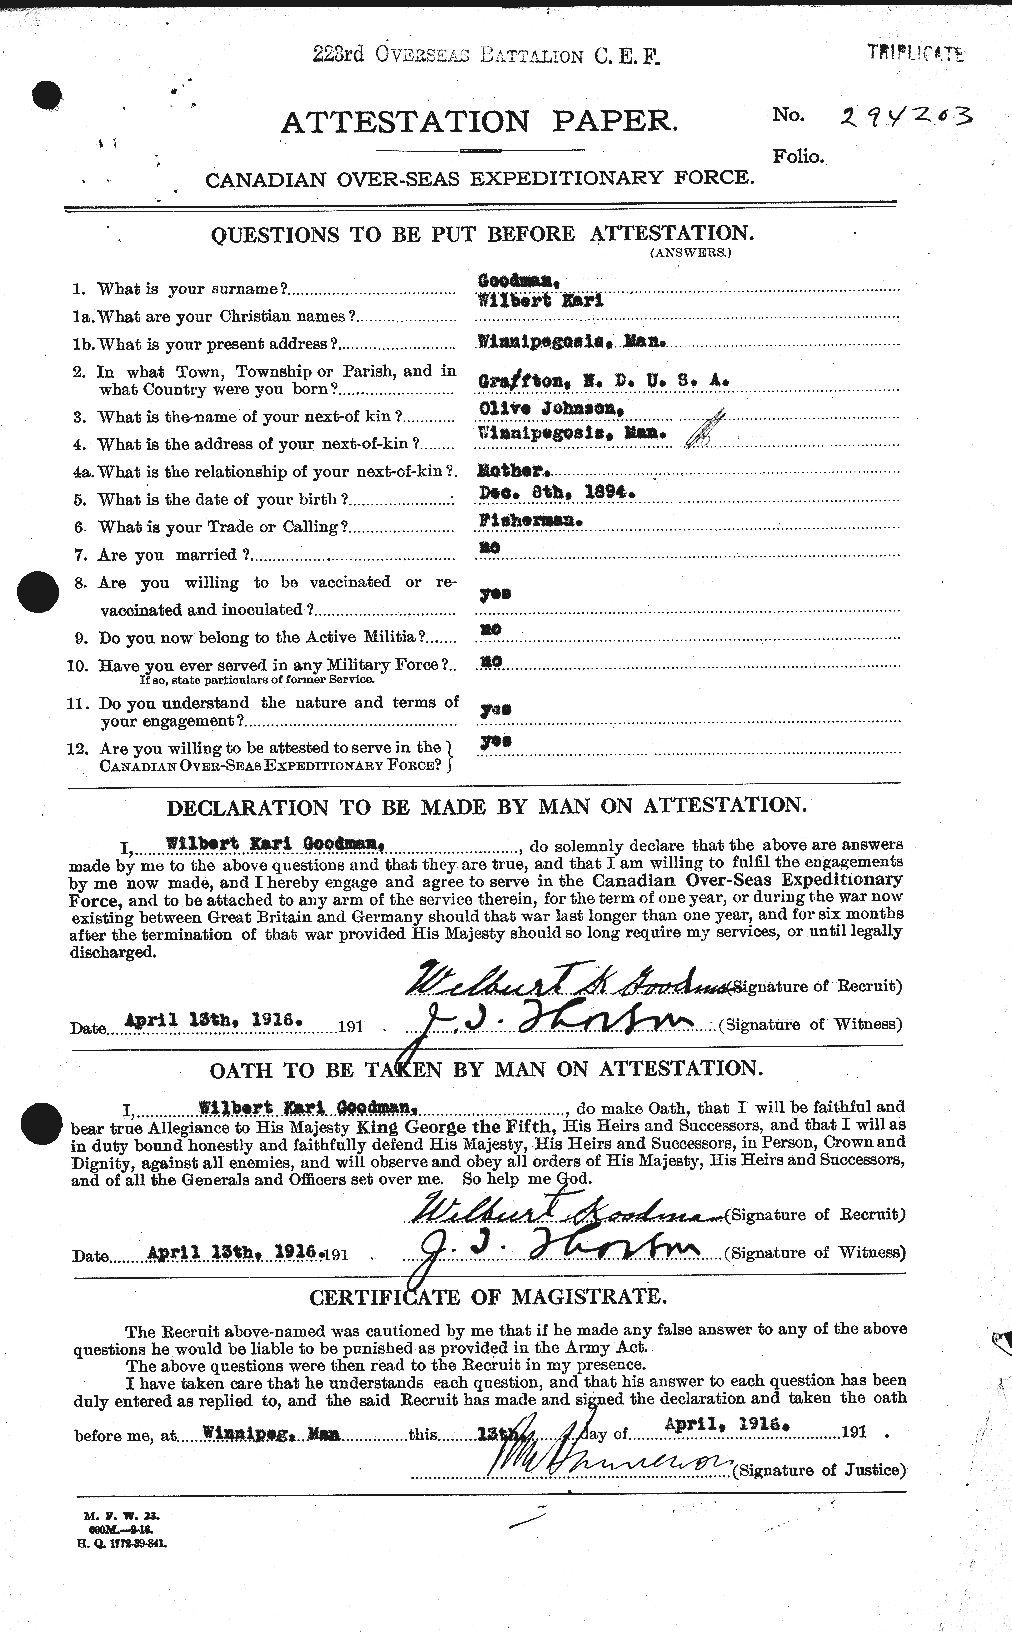 Personnel Records of the First World War - CEF 356226a